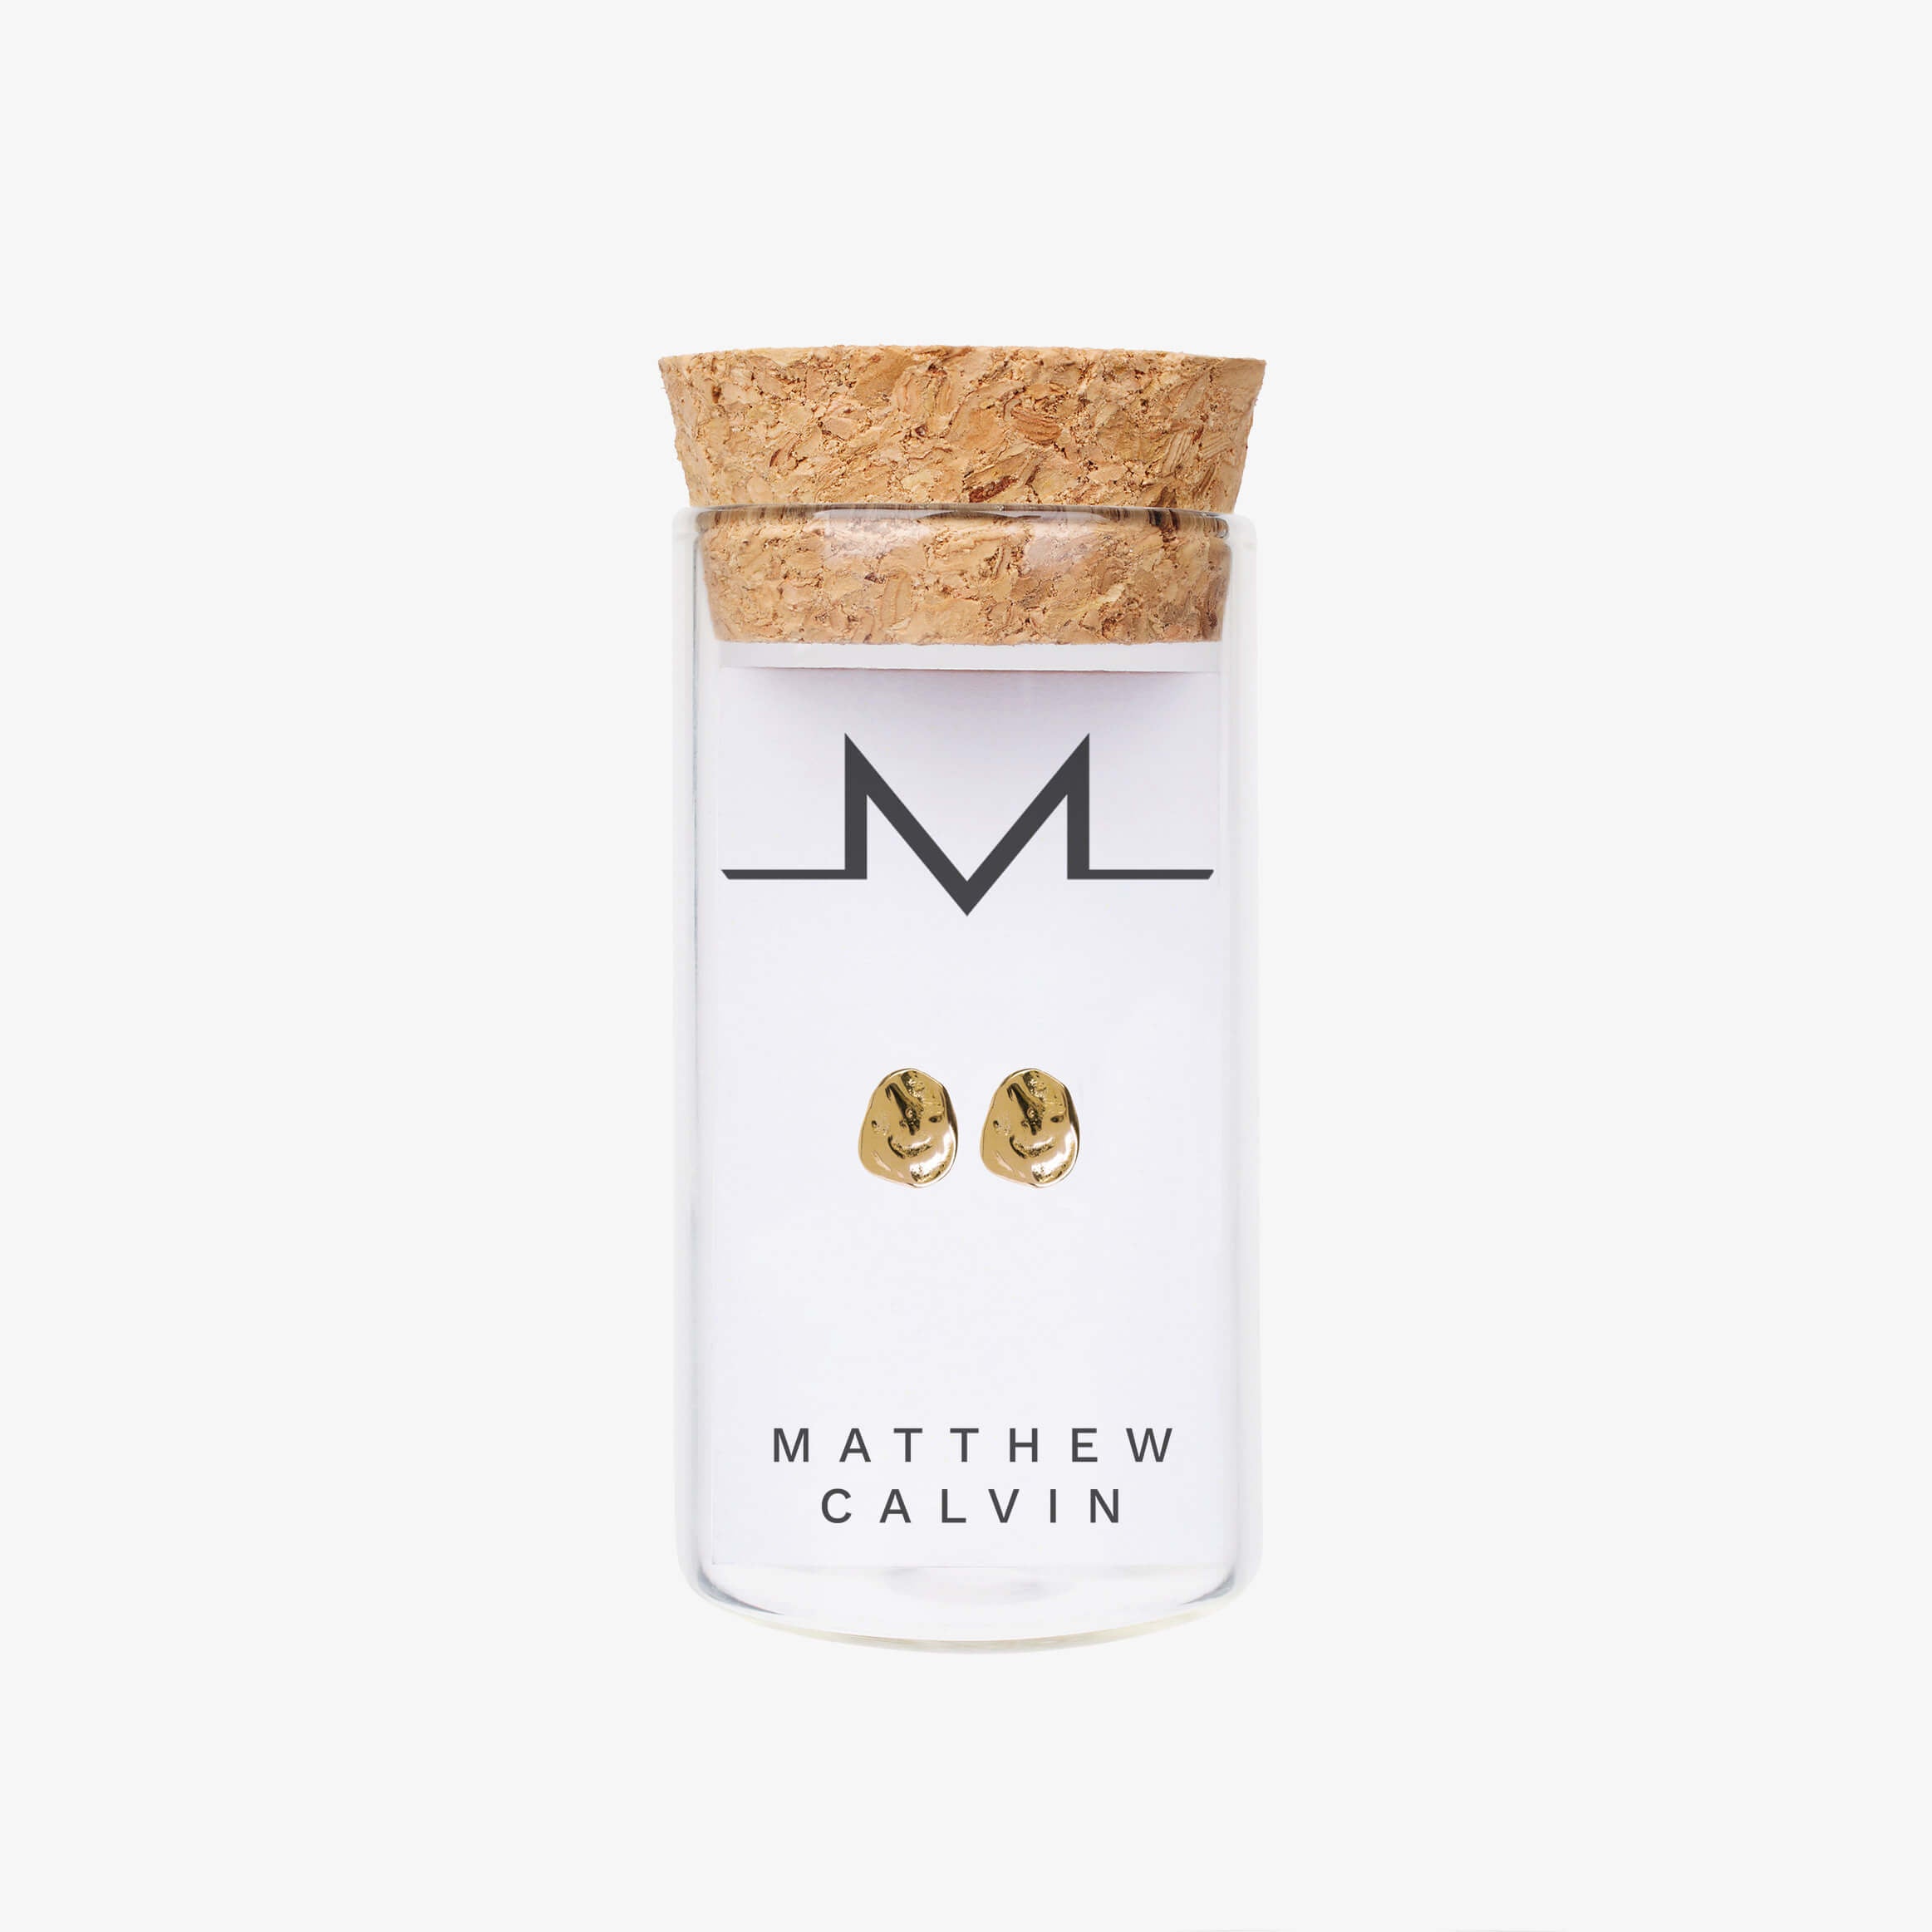 small gold nugget dappled stud earrings by matthew calvin presented in a glass tube with cork stopper on a white background